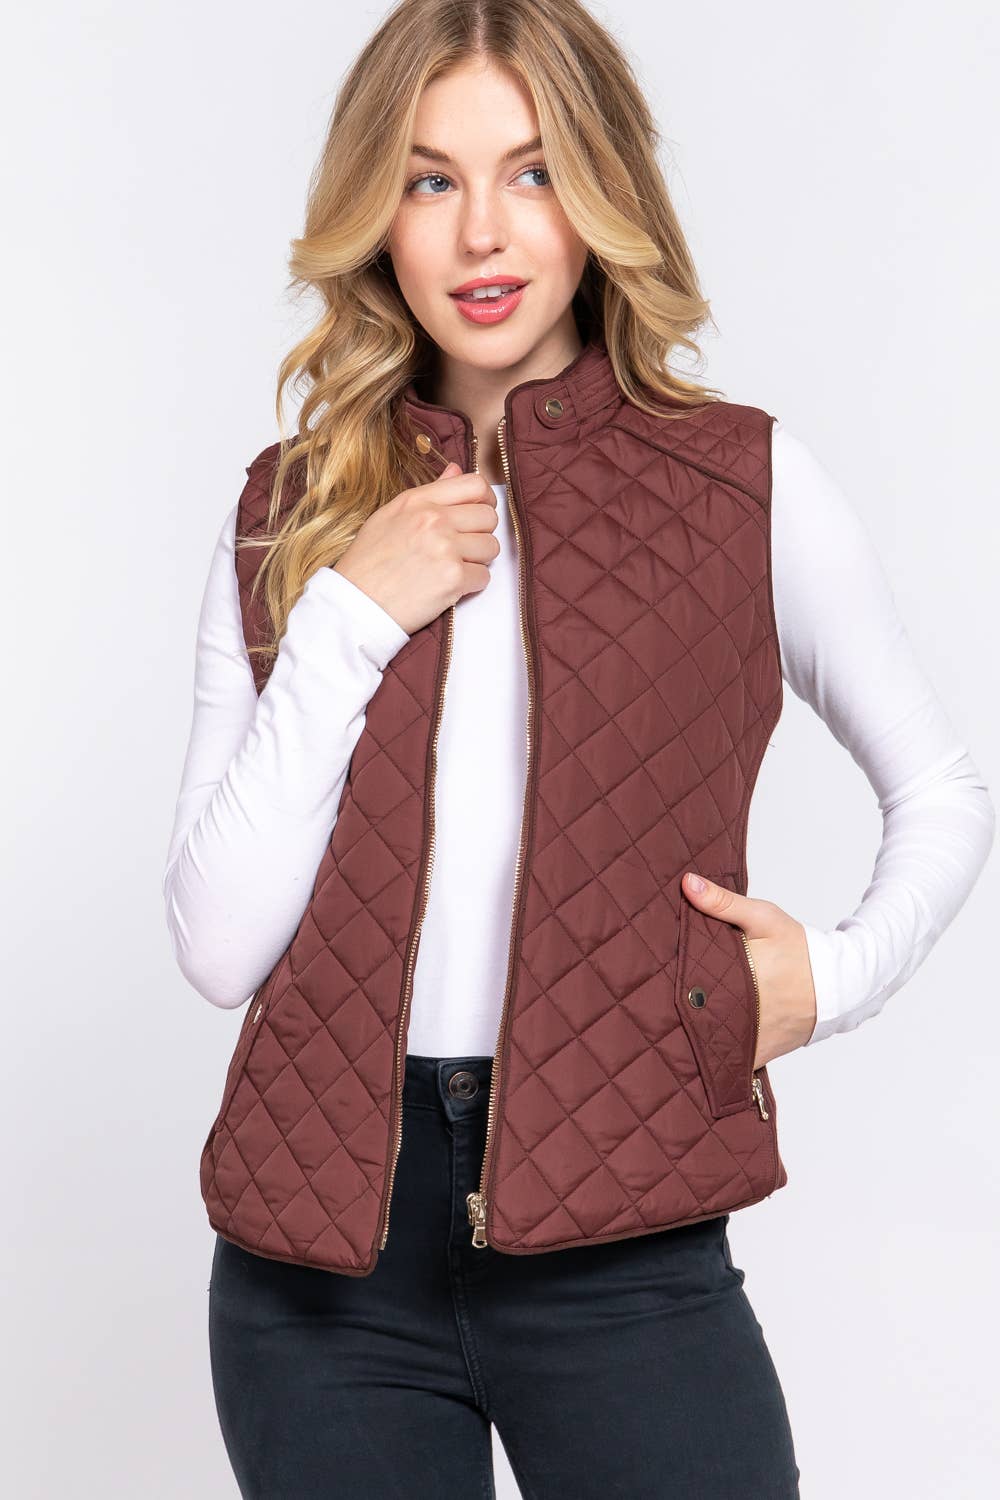 SI-24743 SLIM FIT SUEDE PIPING QUILTED PADDING VEST: NVY-navy-155350